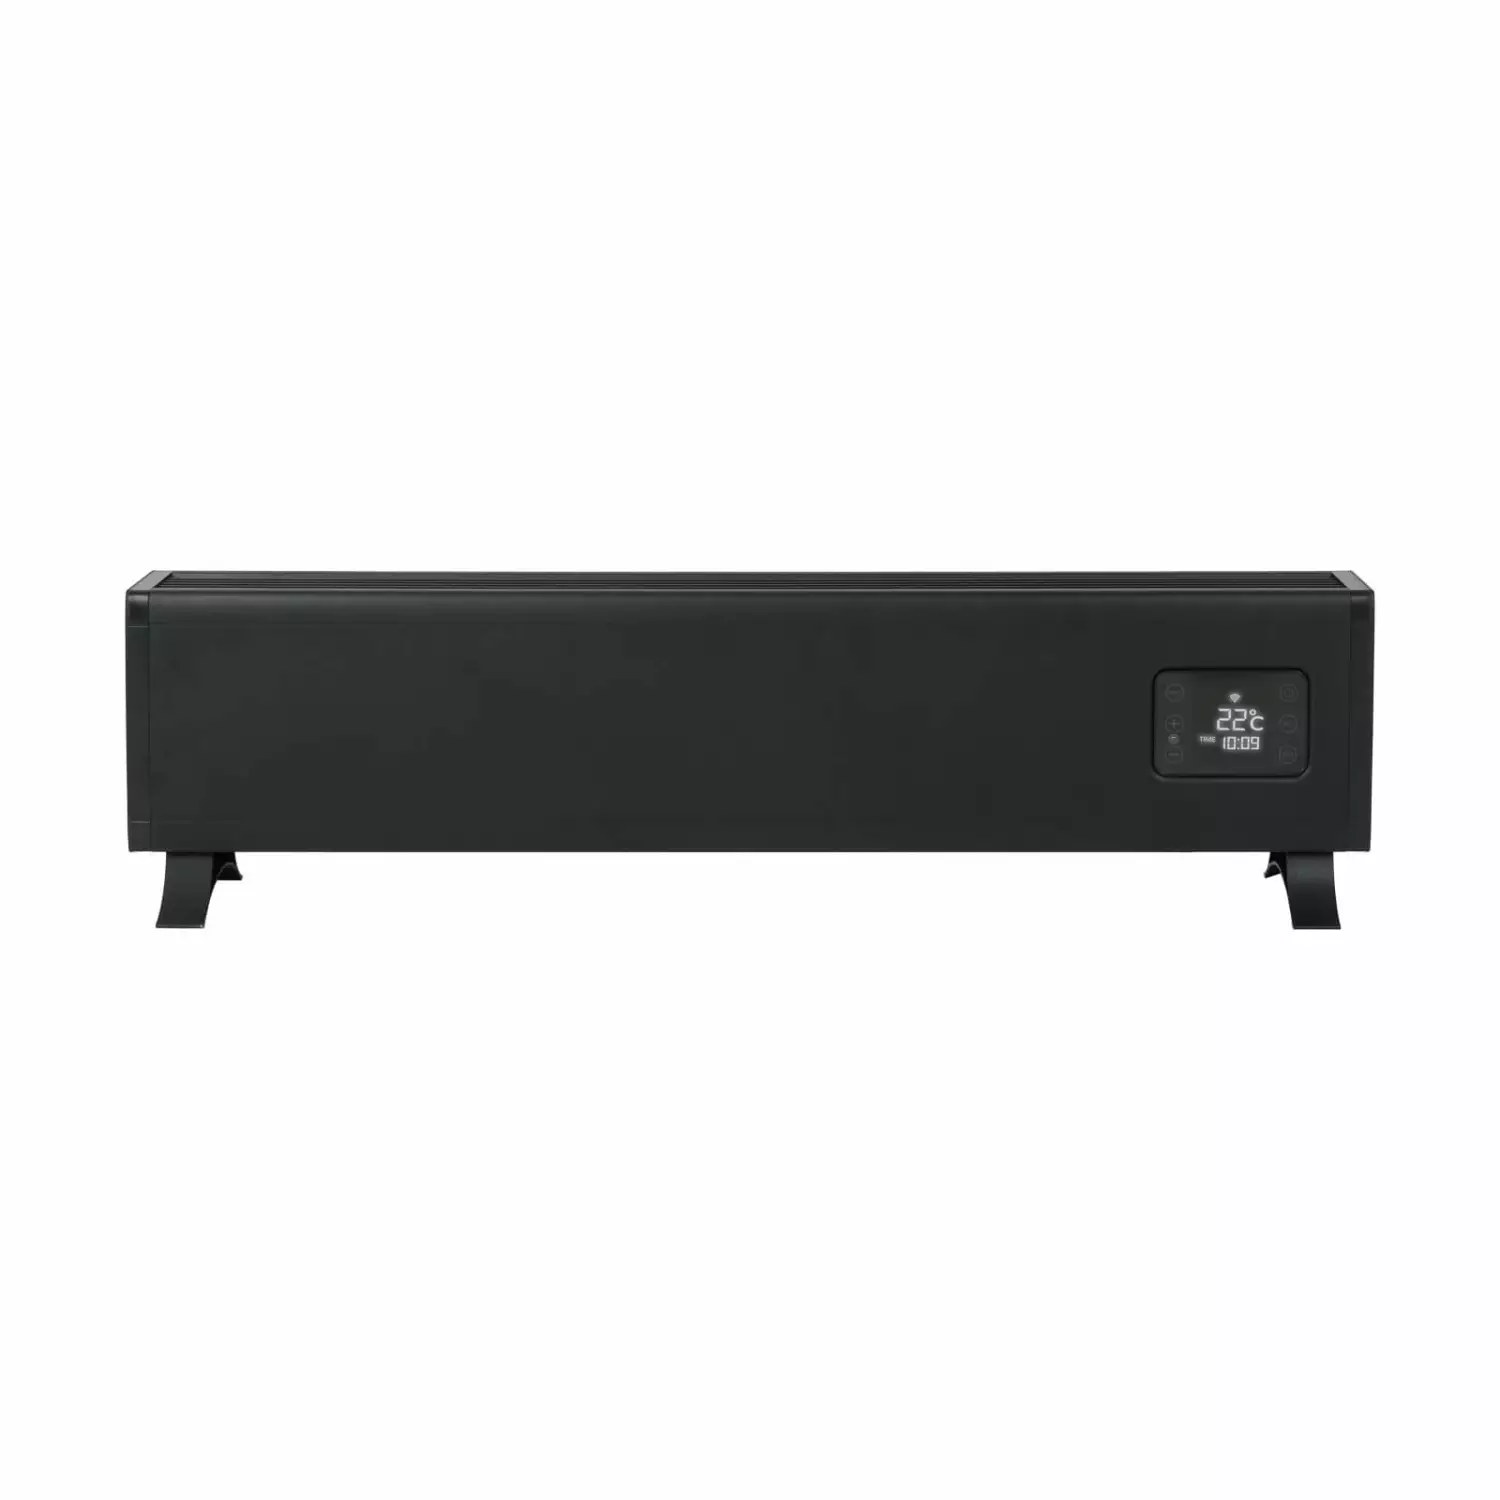 Eurom Alutherm Baseboard 1000 Wi-Fi Black Convectorkachel - 1000W - 40m3-image